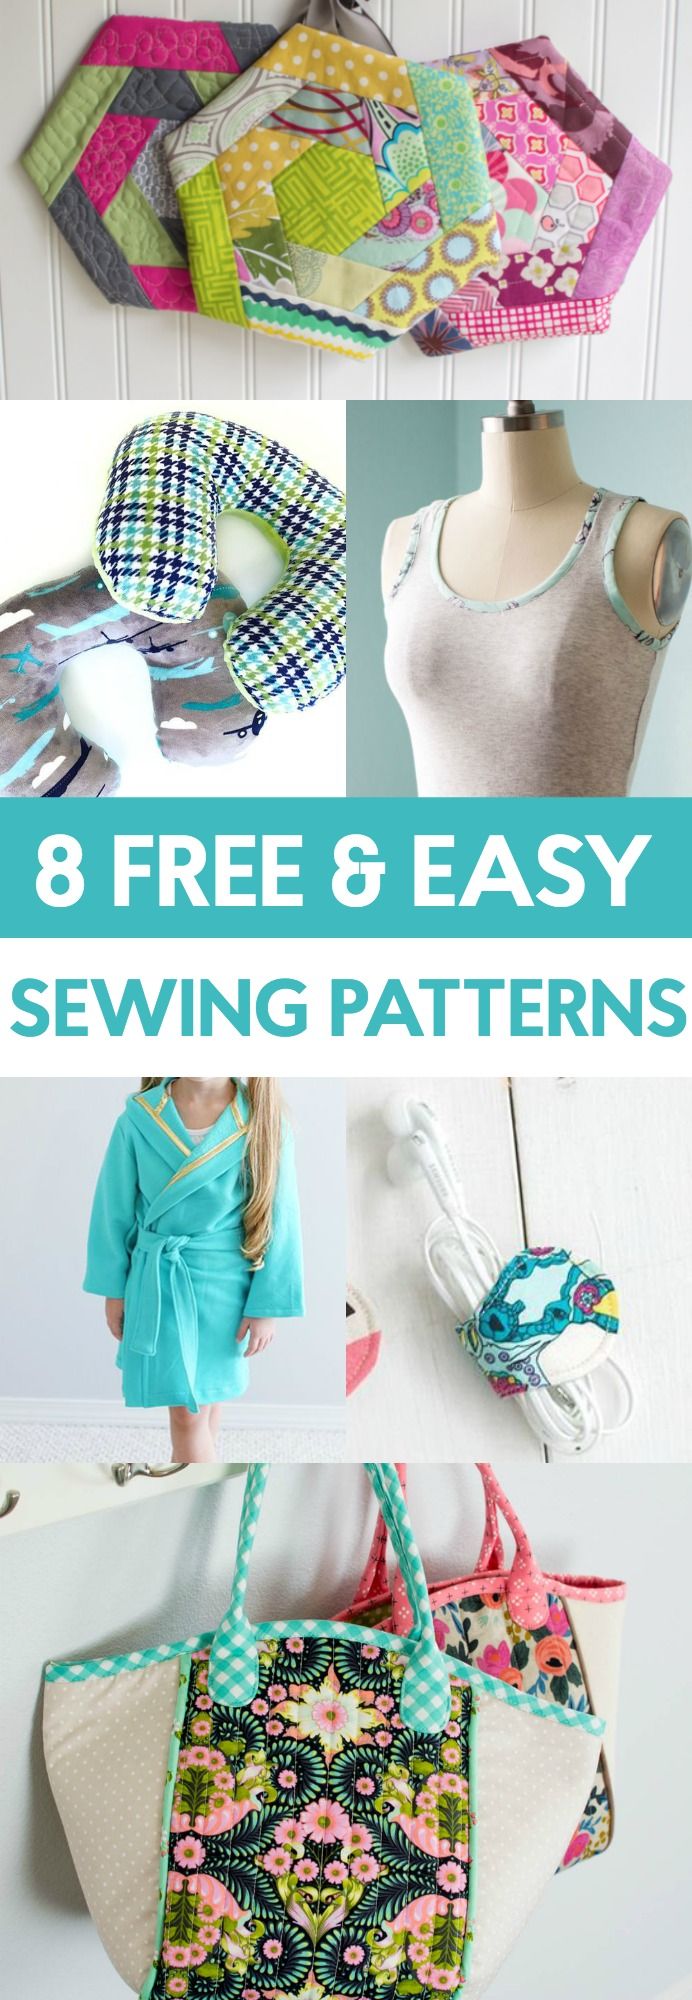 These 8 free sewing patterns for beginners are incredible. The instructions are ...